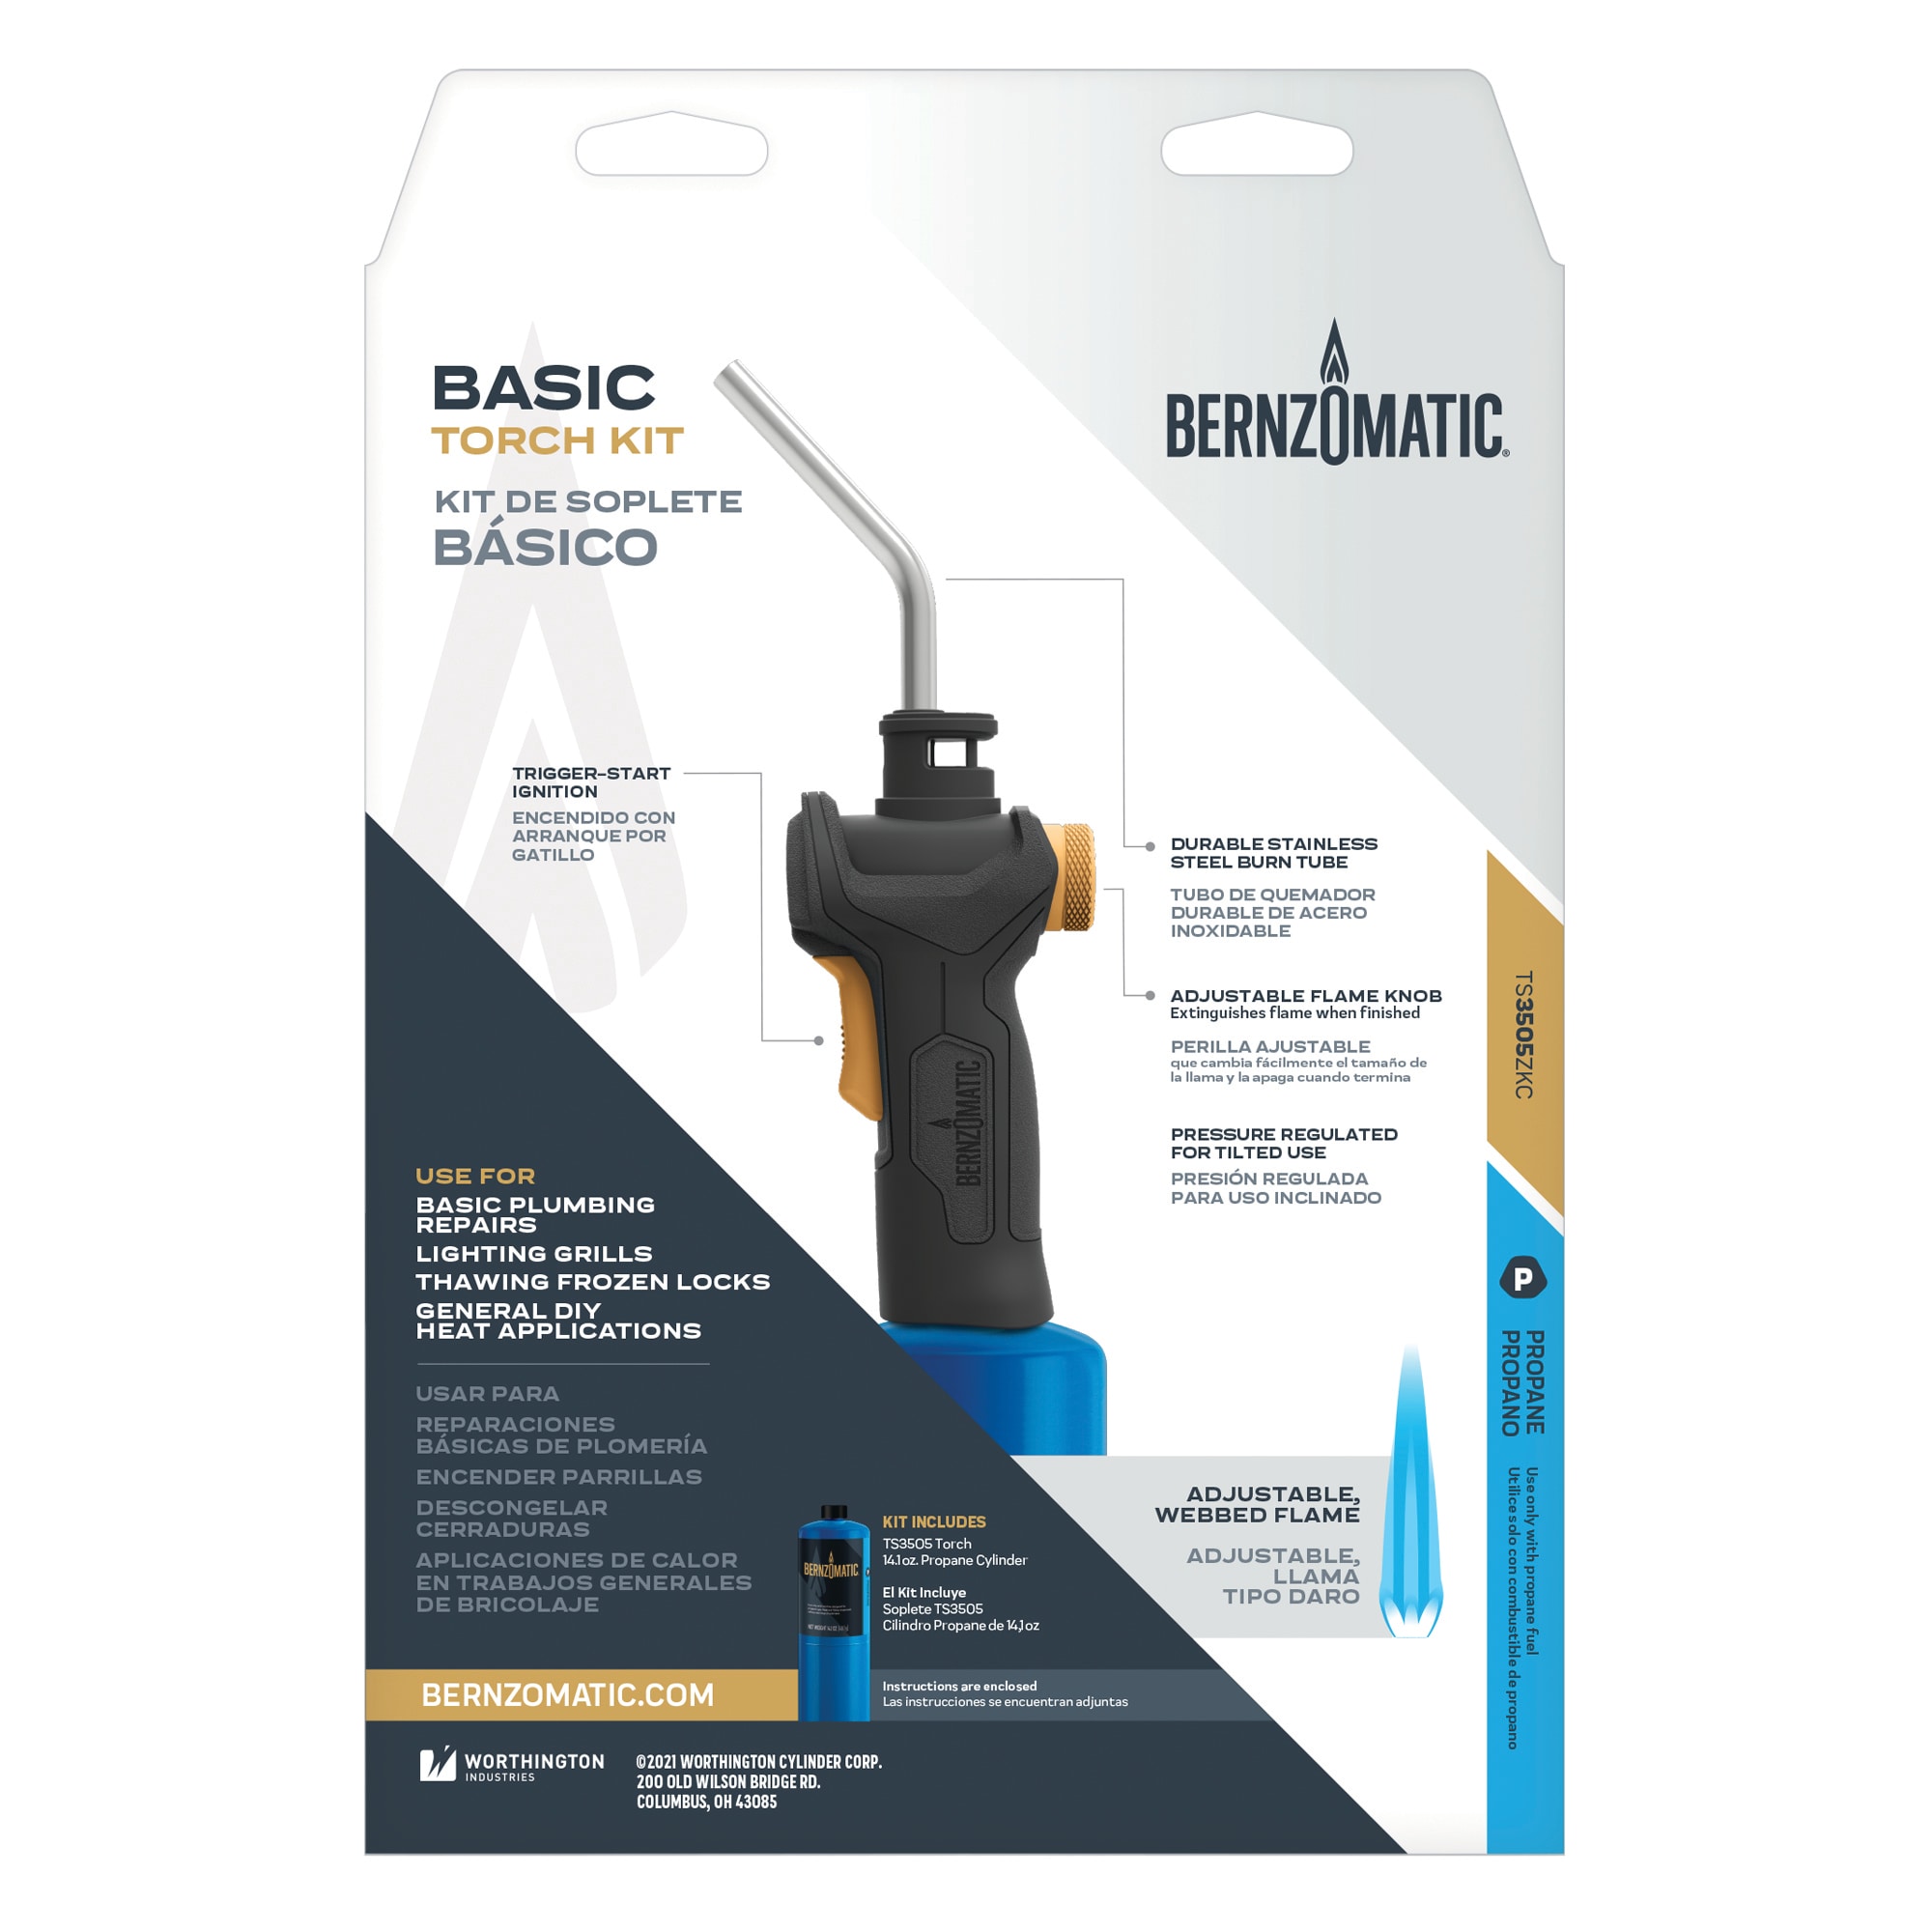 Bernzomatic Butane Torch Cylinder for Heating Applications, Flame  Temperature up to 3,150F, Universal Fueling Tip, Odorized - 2-in Length,  0.55 lbs. in the Handheld Torches department at